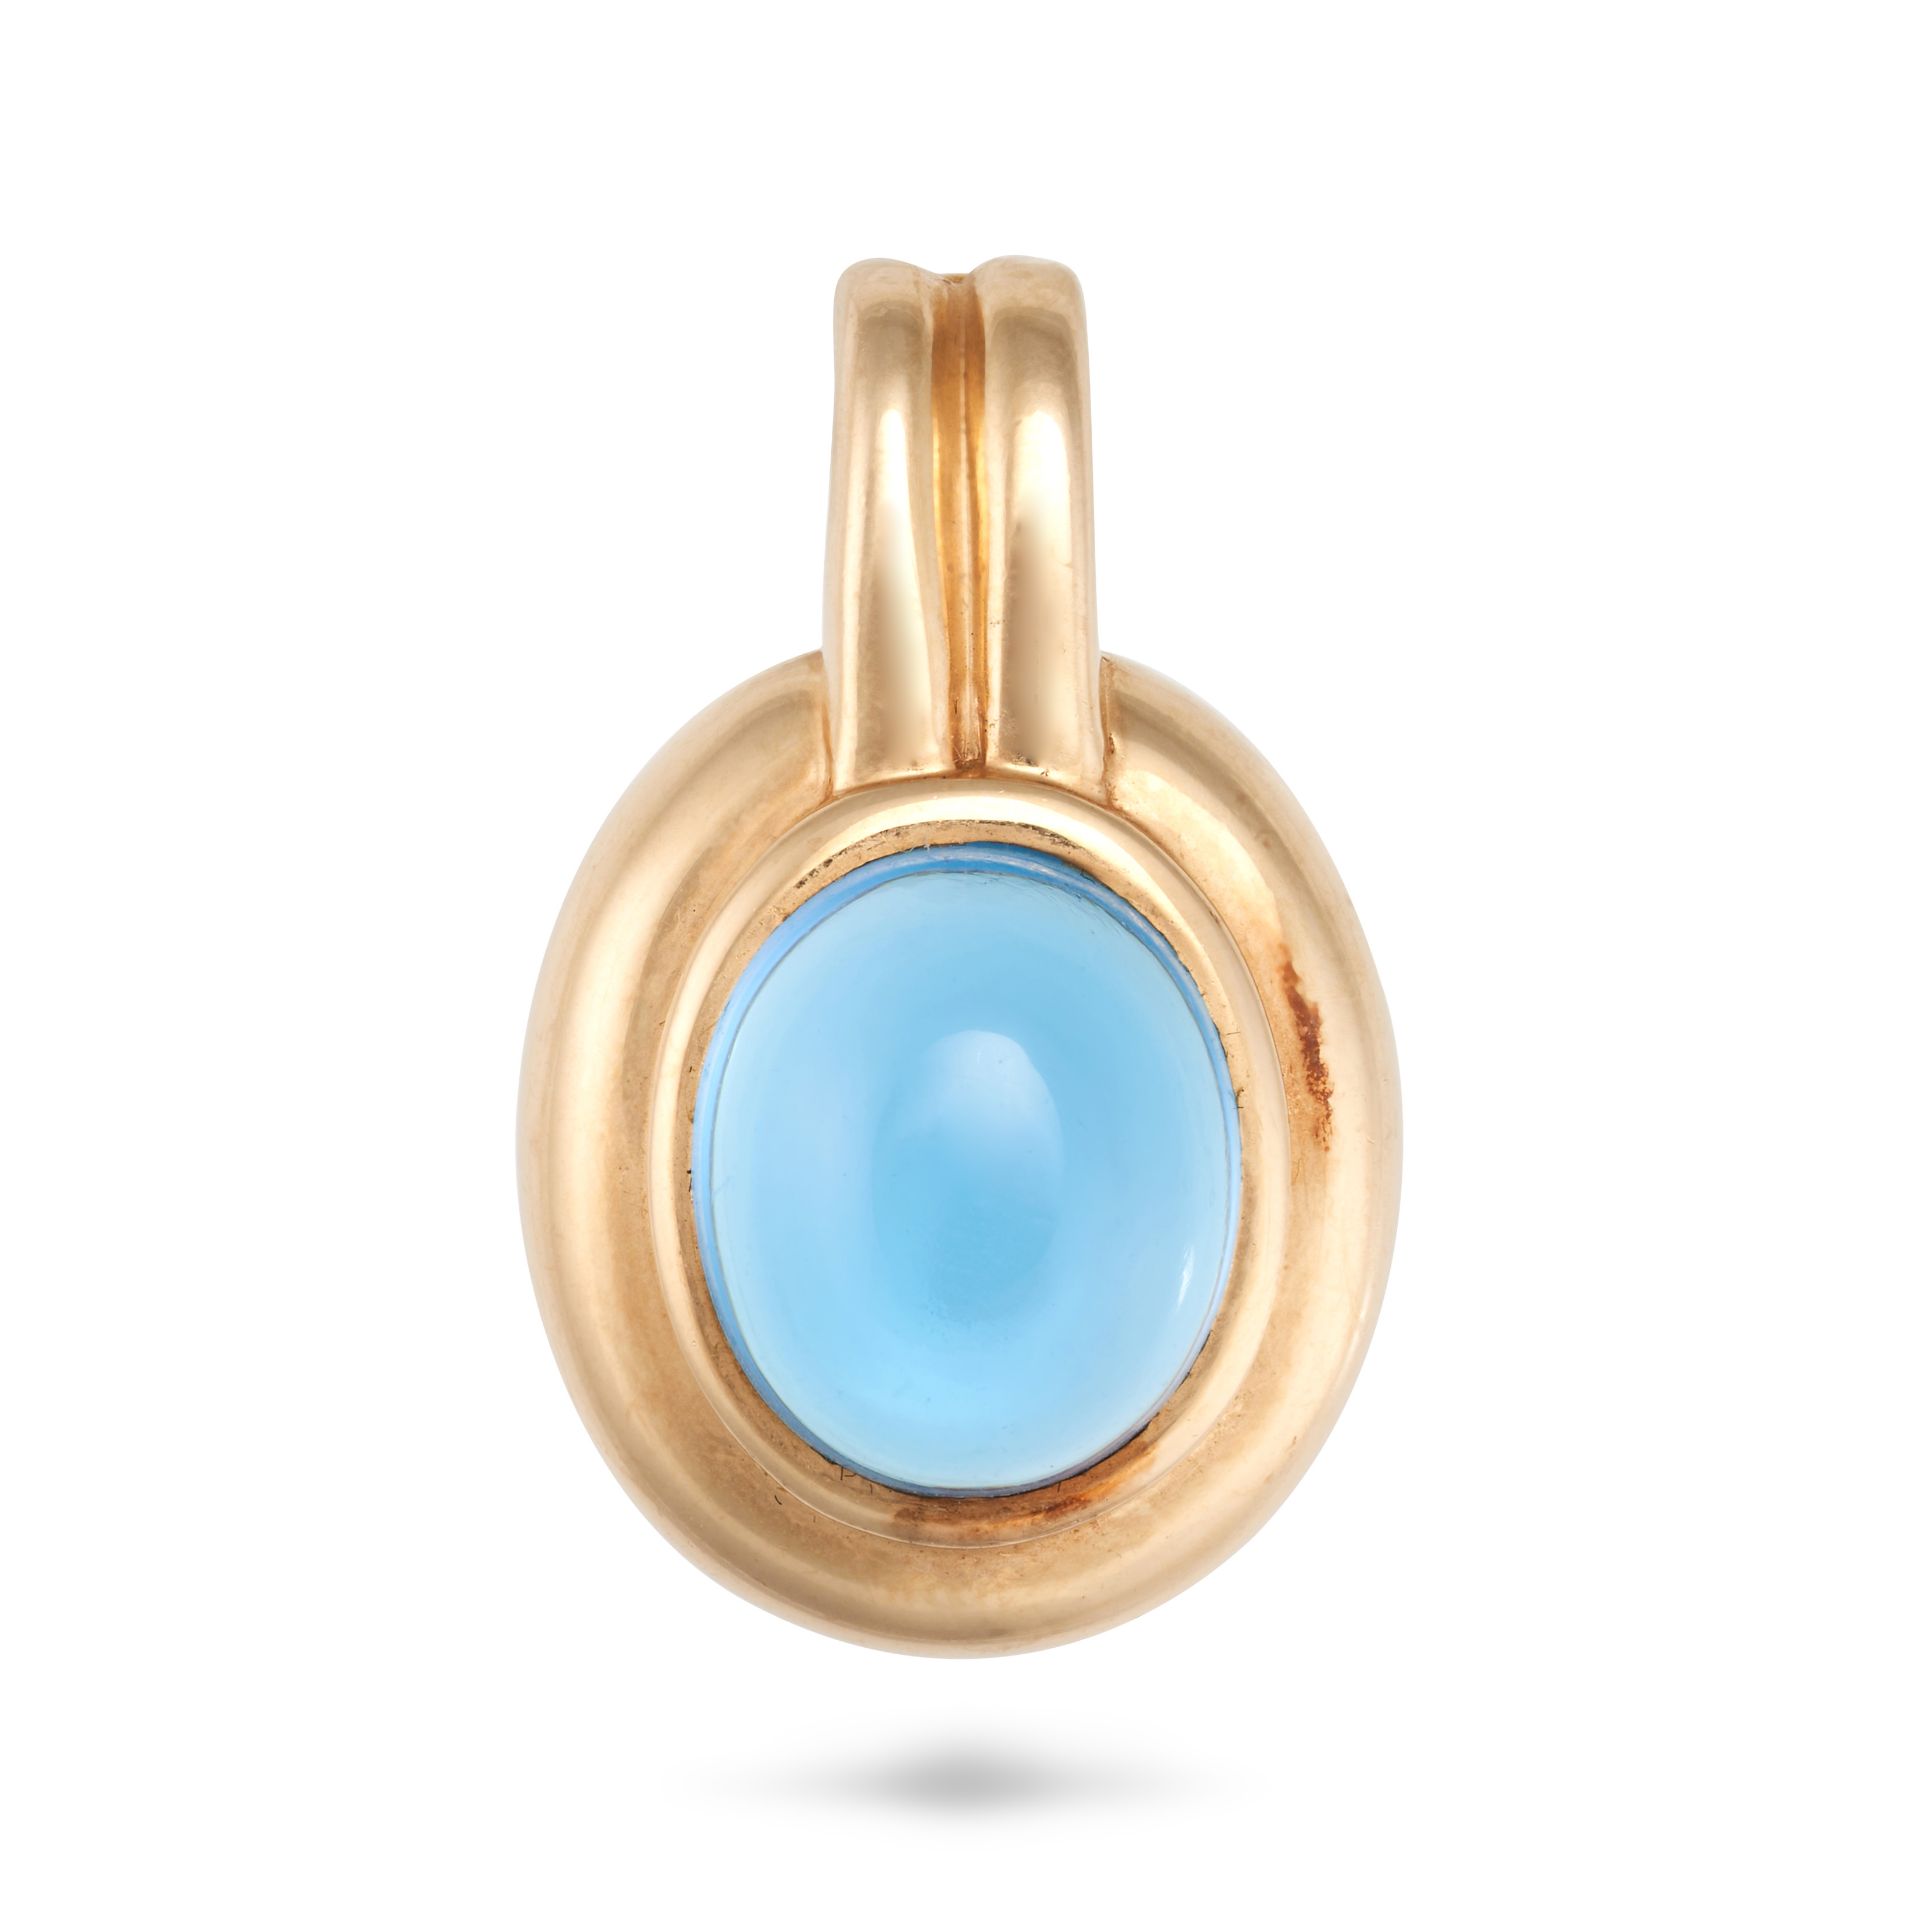 NO RESERVE - A BLUE TOPAZ PENDANT in 14ct yellow gold, set with a cabochon blue topaz of approxim...